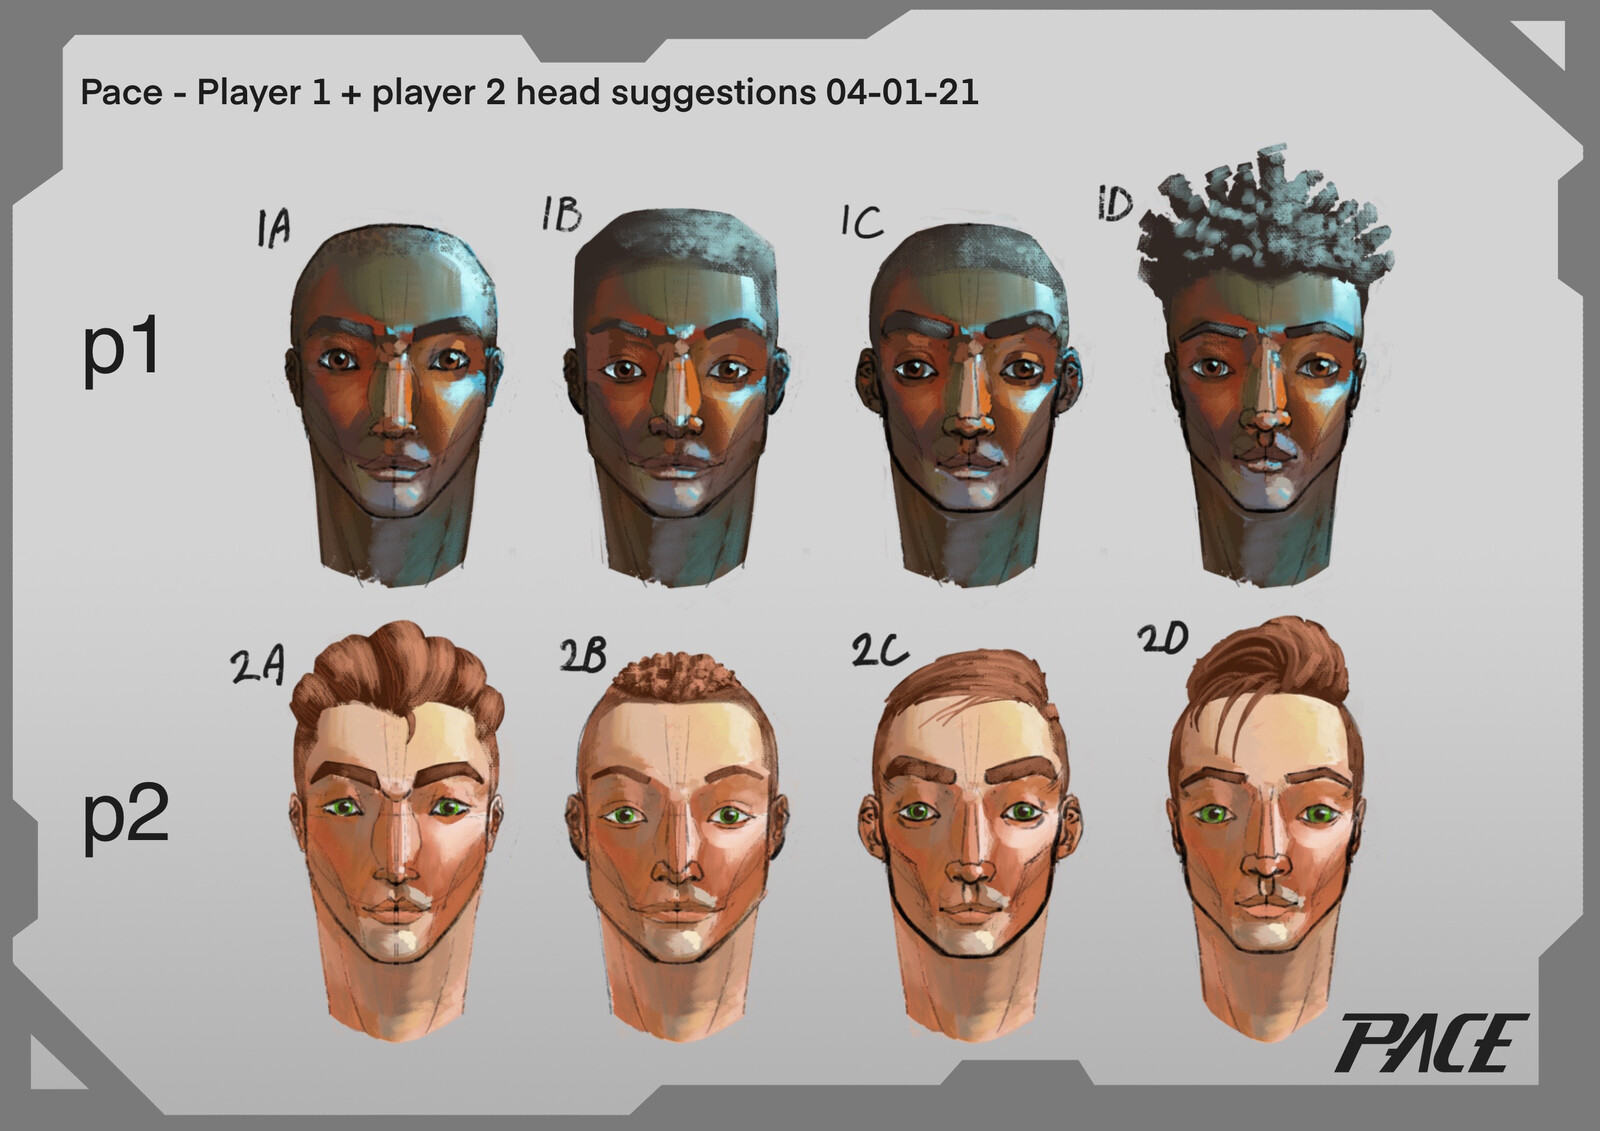 Character portraits to inspire character customization